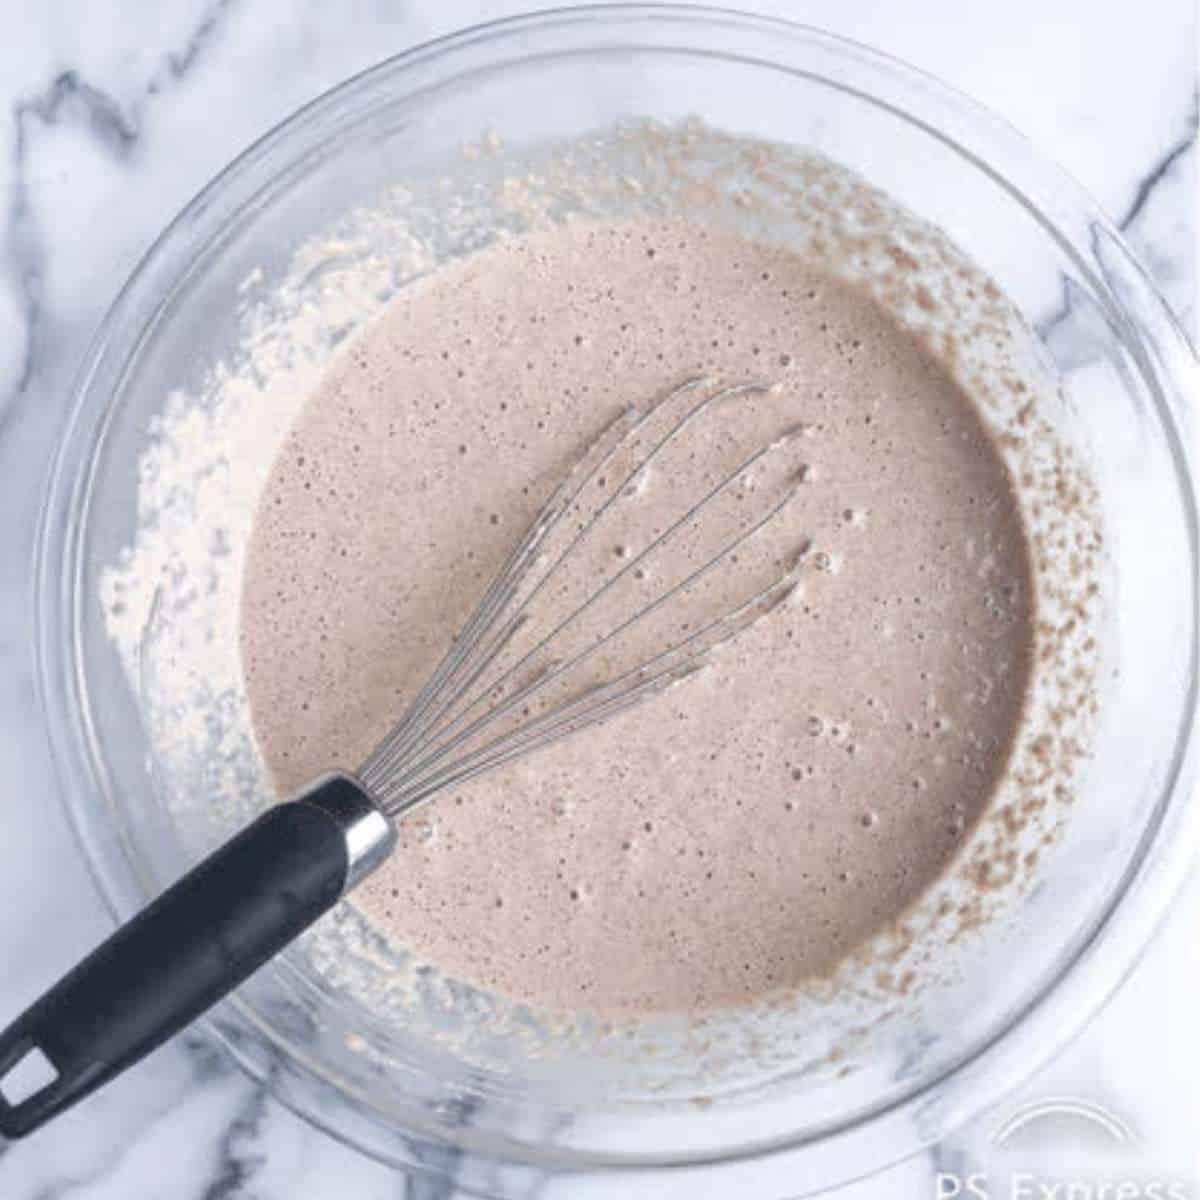 Batter to make gluten-free vegan oat flour waffles in a bowl with a whisk.